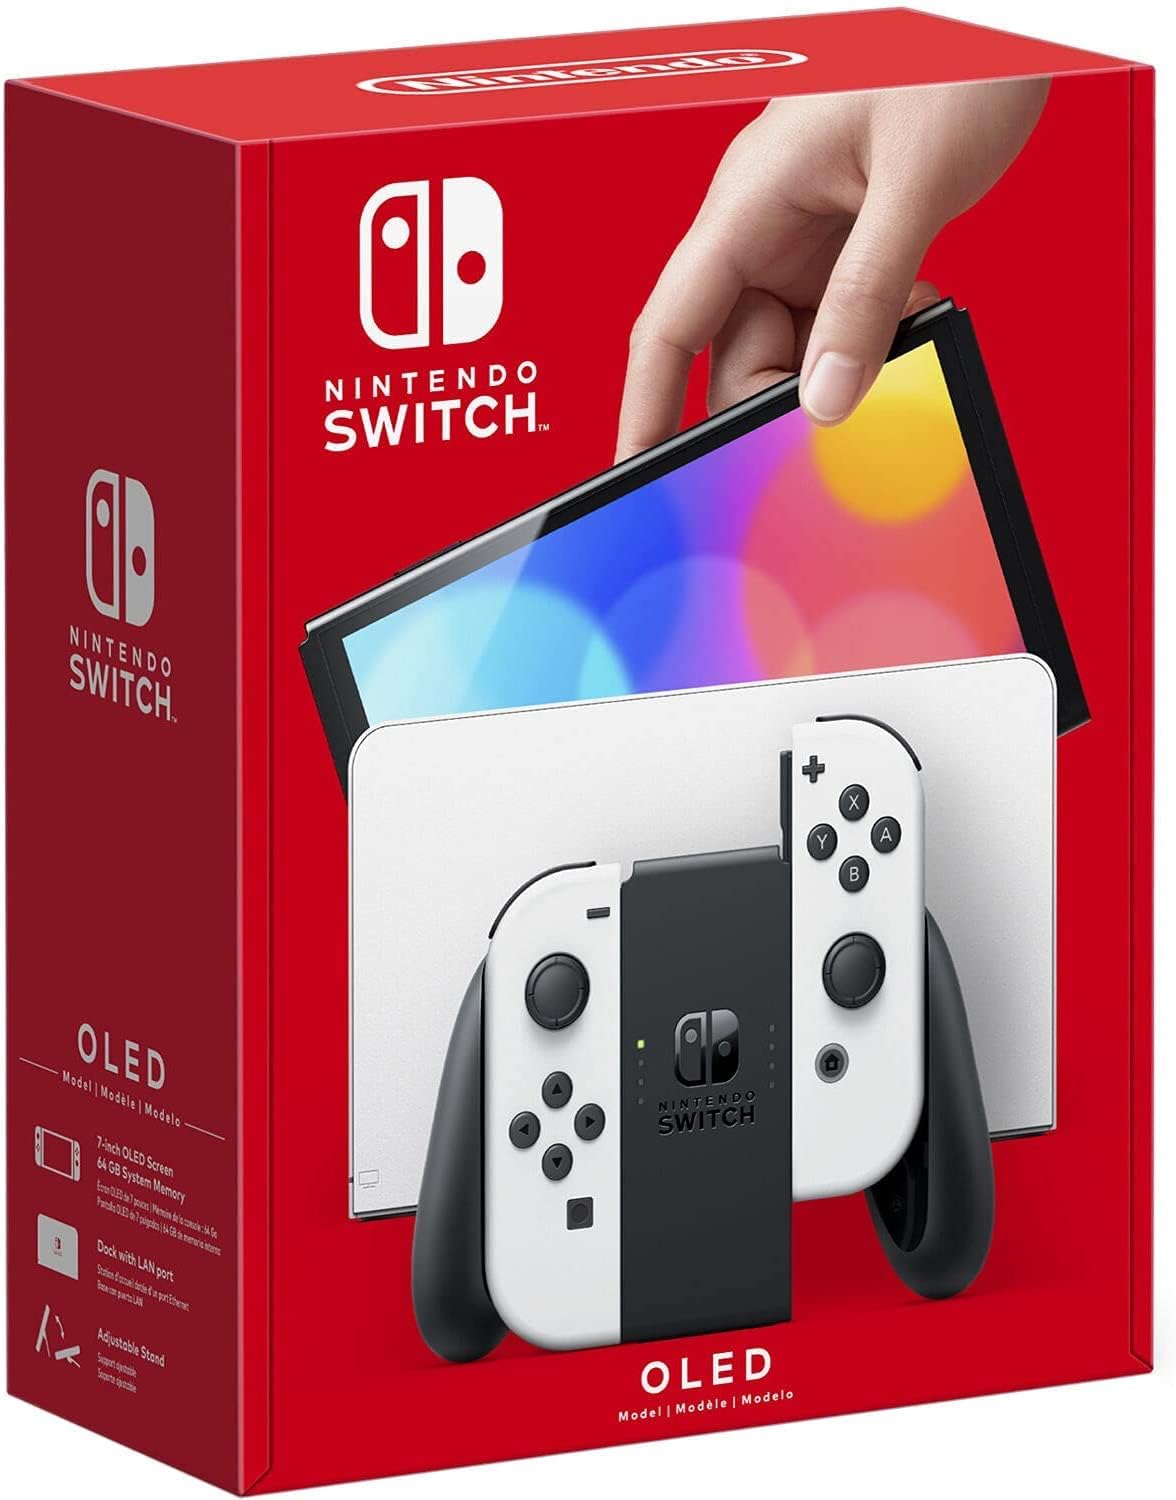 Nintendo Switch OLED Display Handheld Gaming Console with White Controllers and Dock - 7